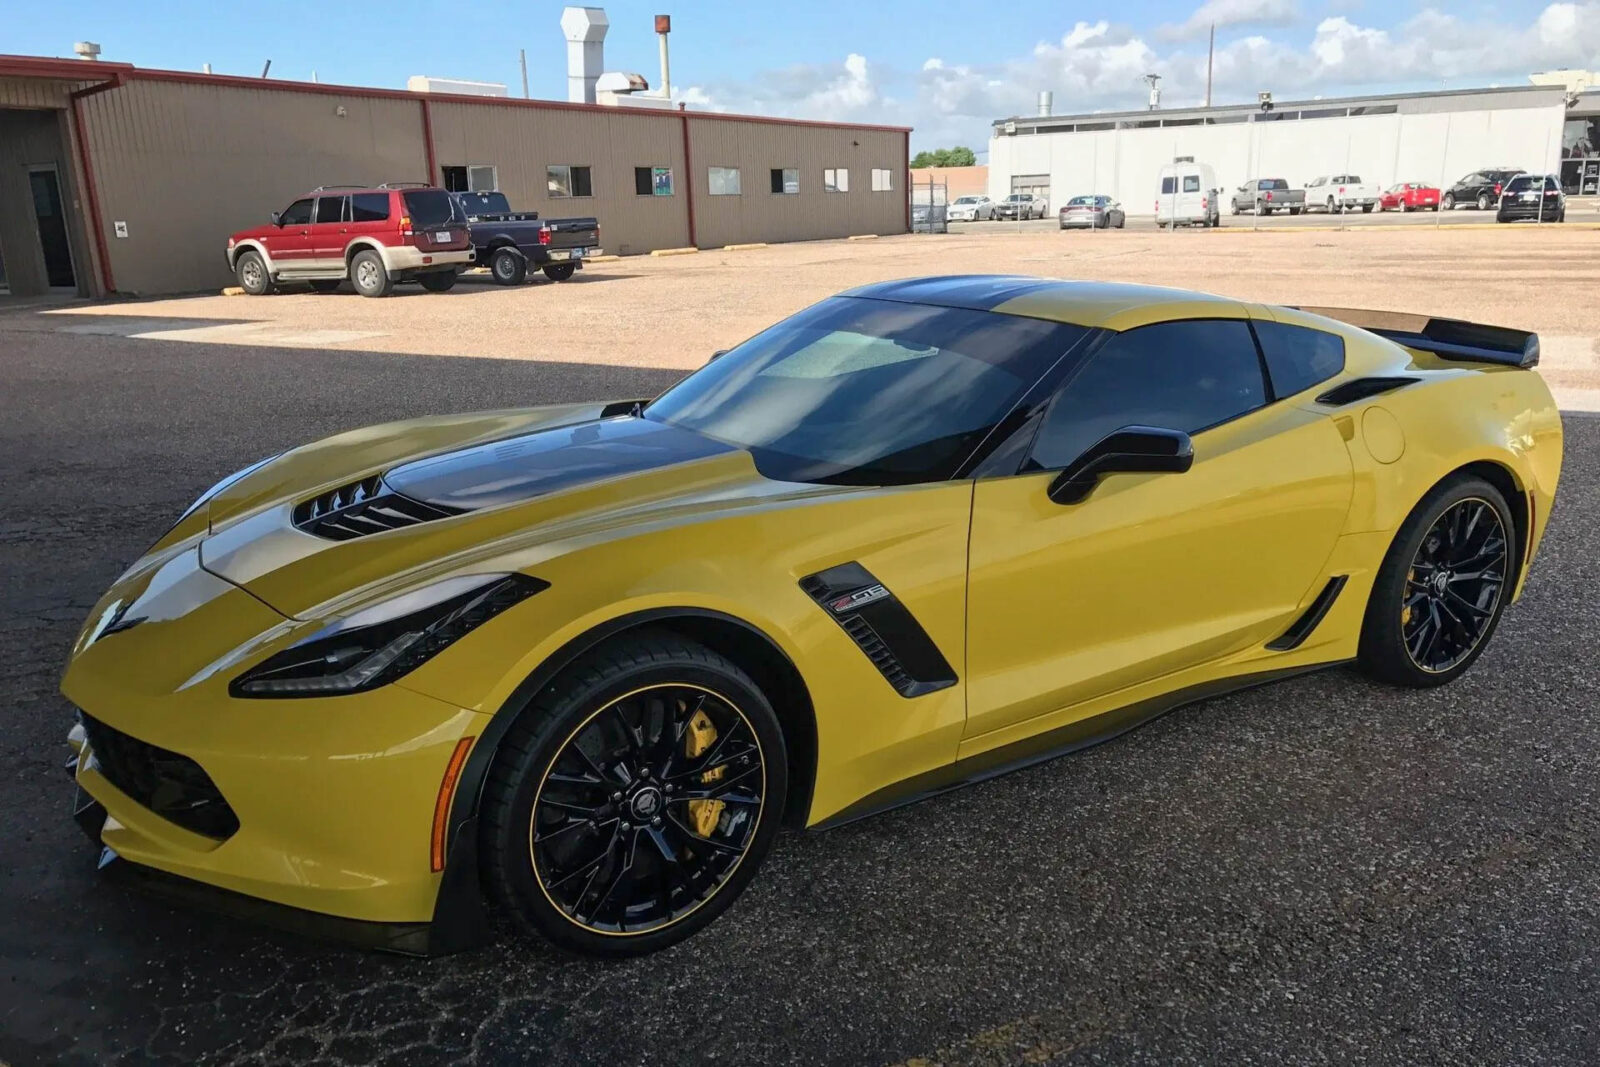 Chevrolet Corvette C7 at Awesome Auto Accessories in Texas